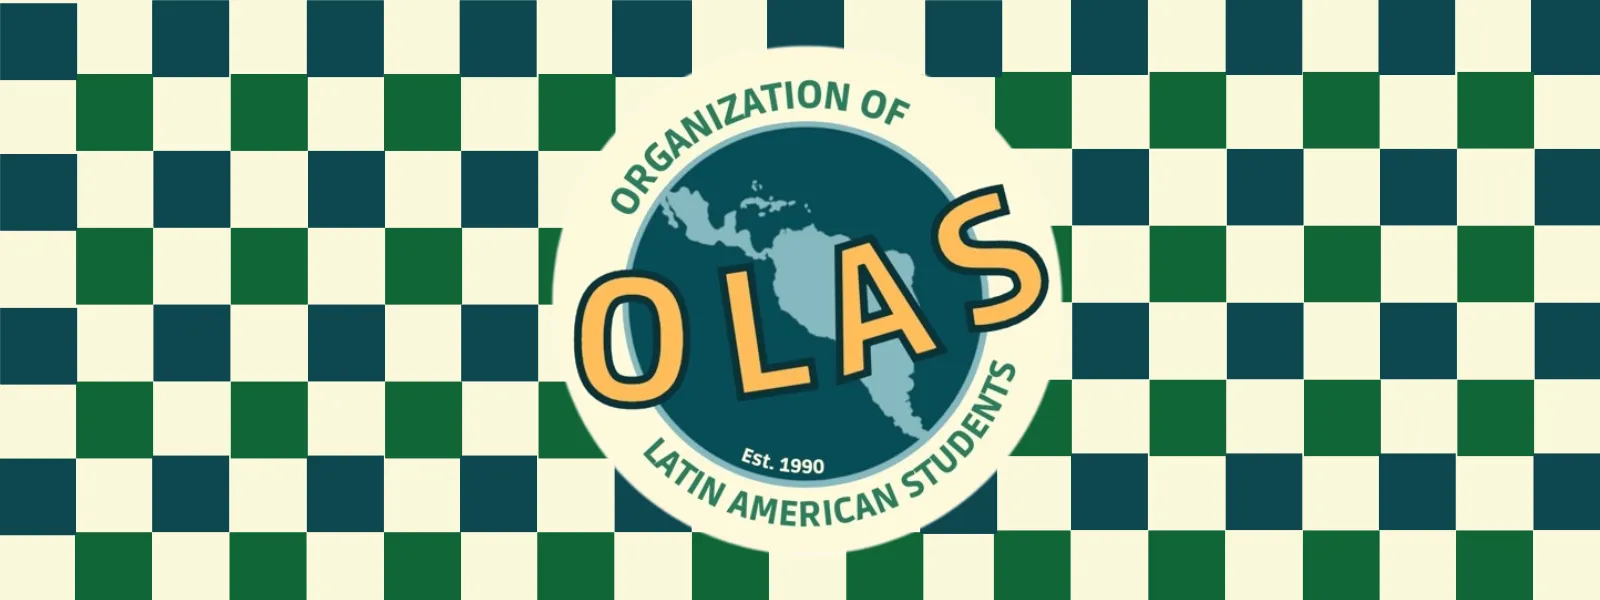 Green checkered background with OLAS text in front of an earth image